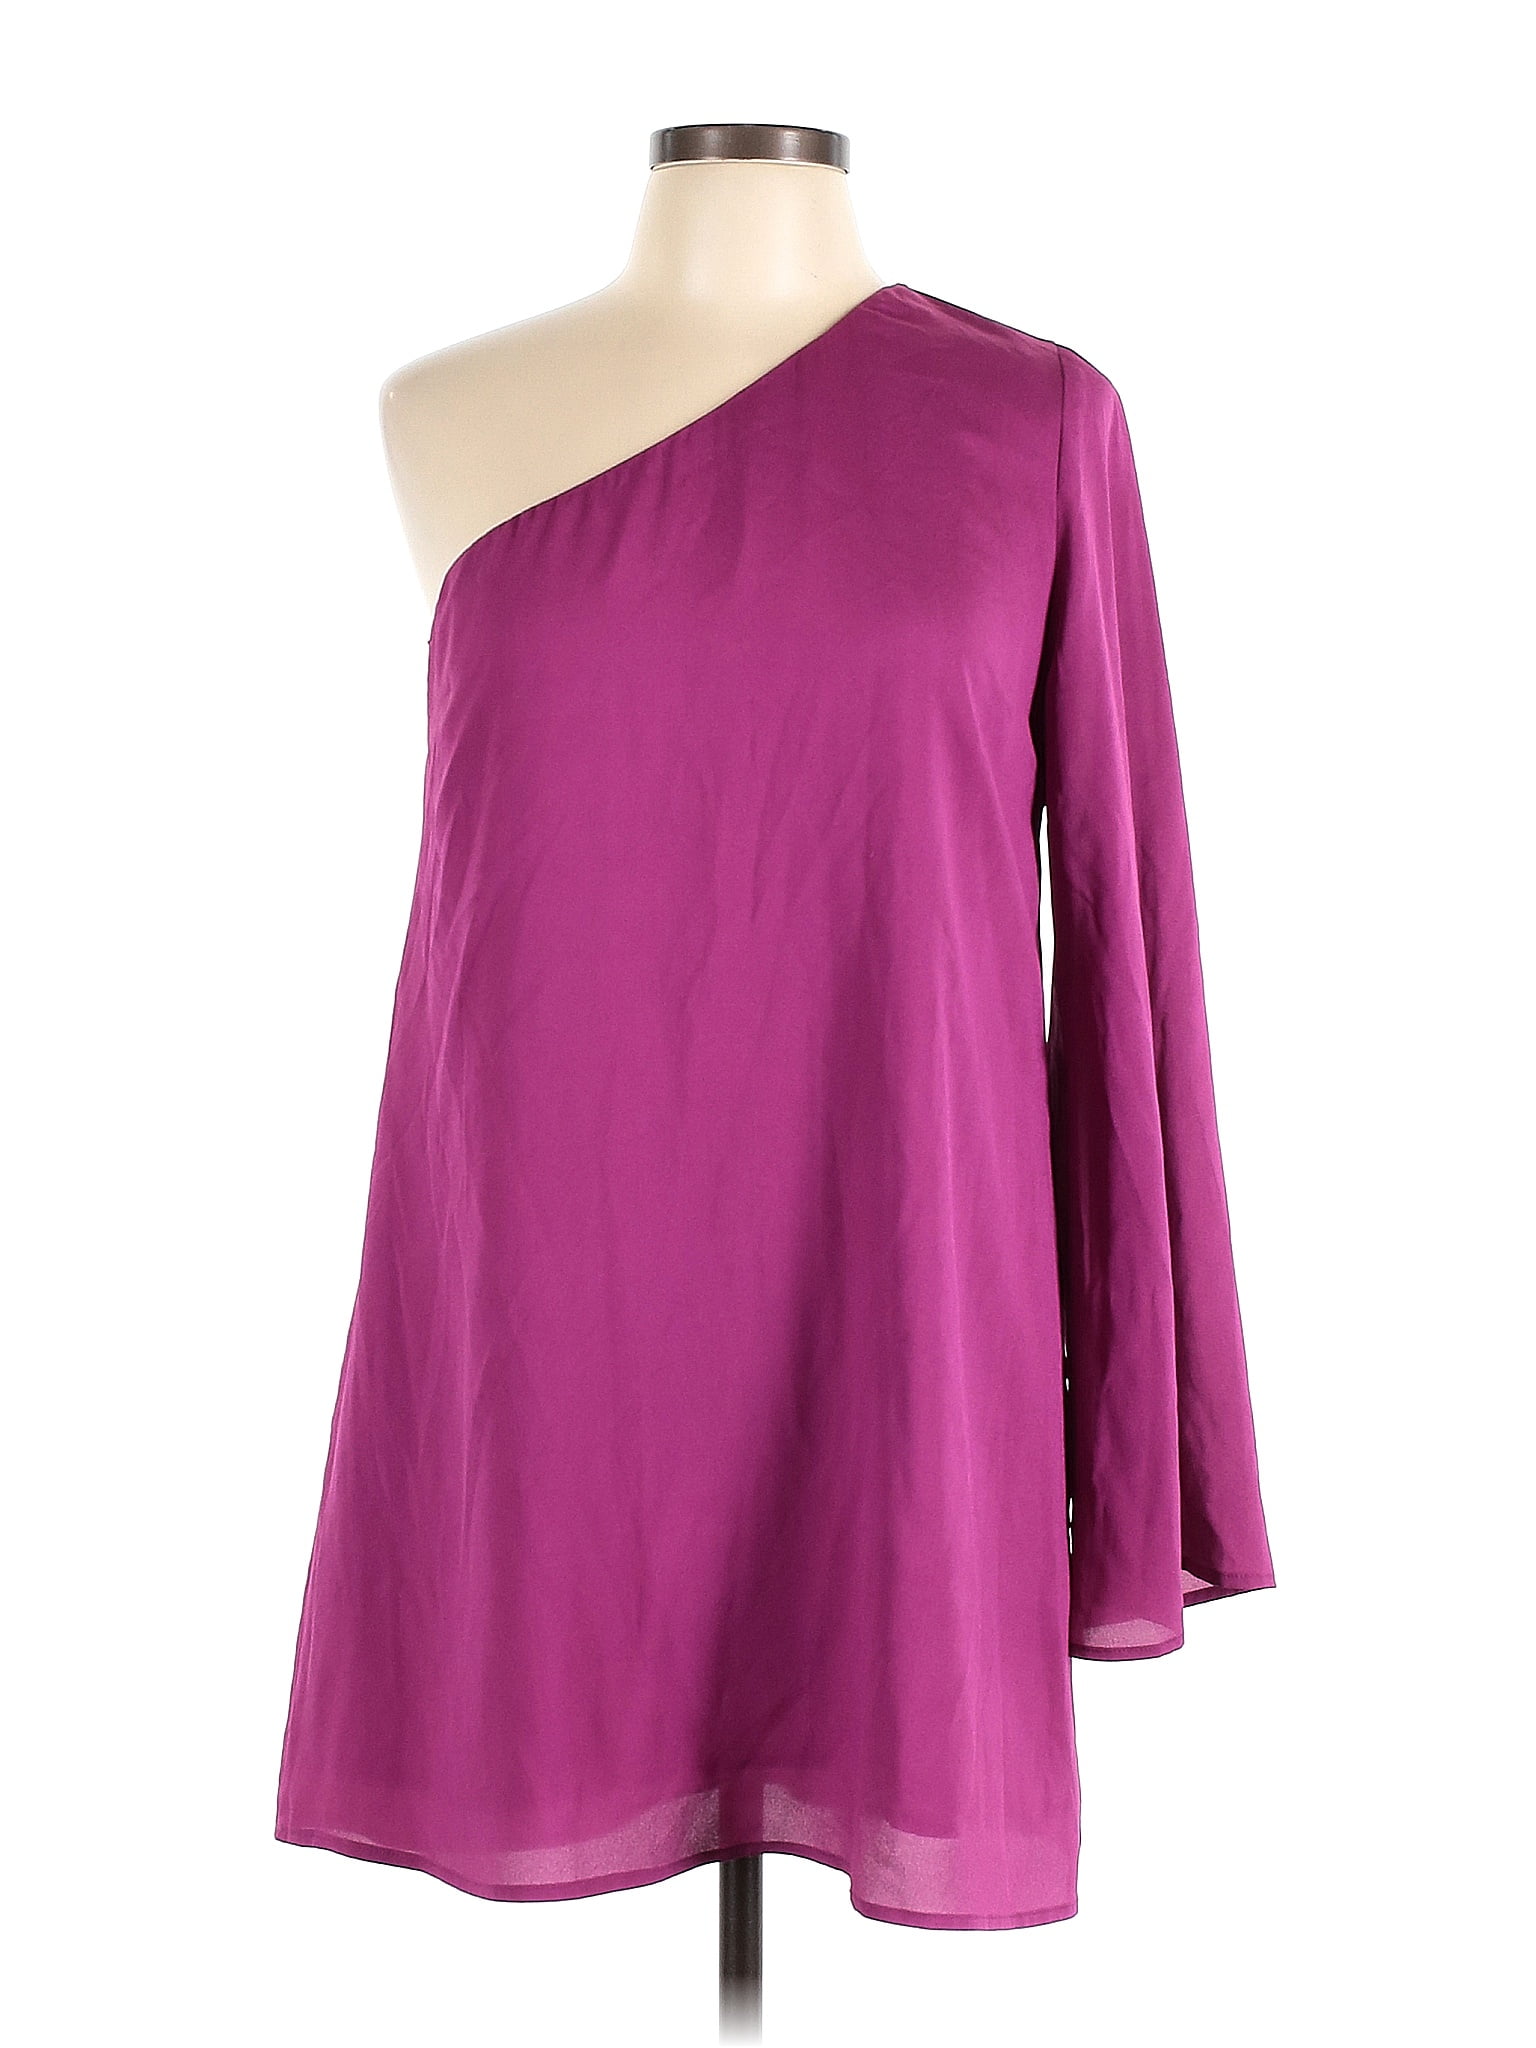 Ark & Co. 100% Polyester Solid Pink Purple Casual Dress Size L